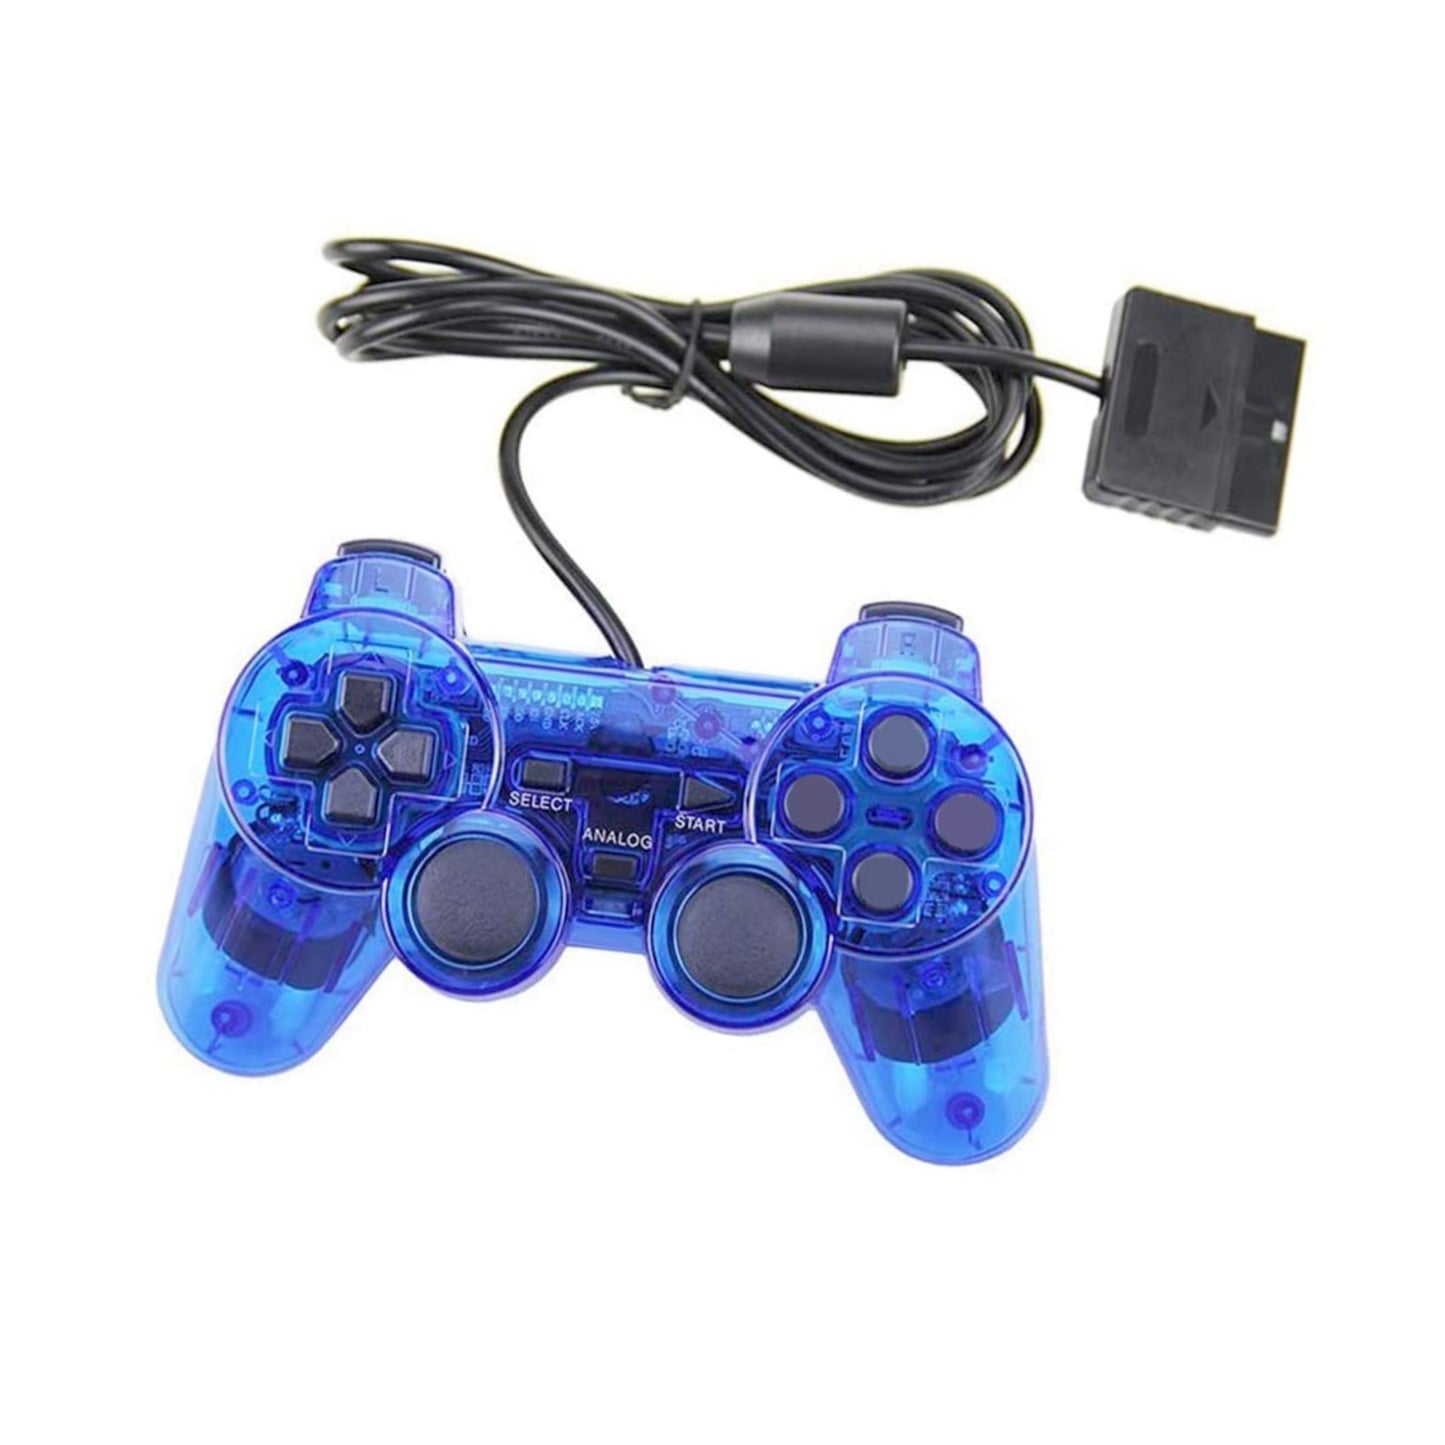 UK Used Playstation 2 (PS2) Slim Wired Game Controller